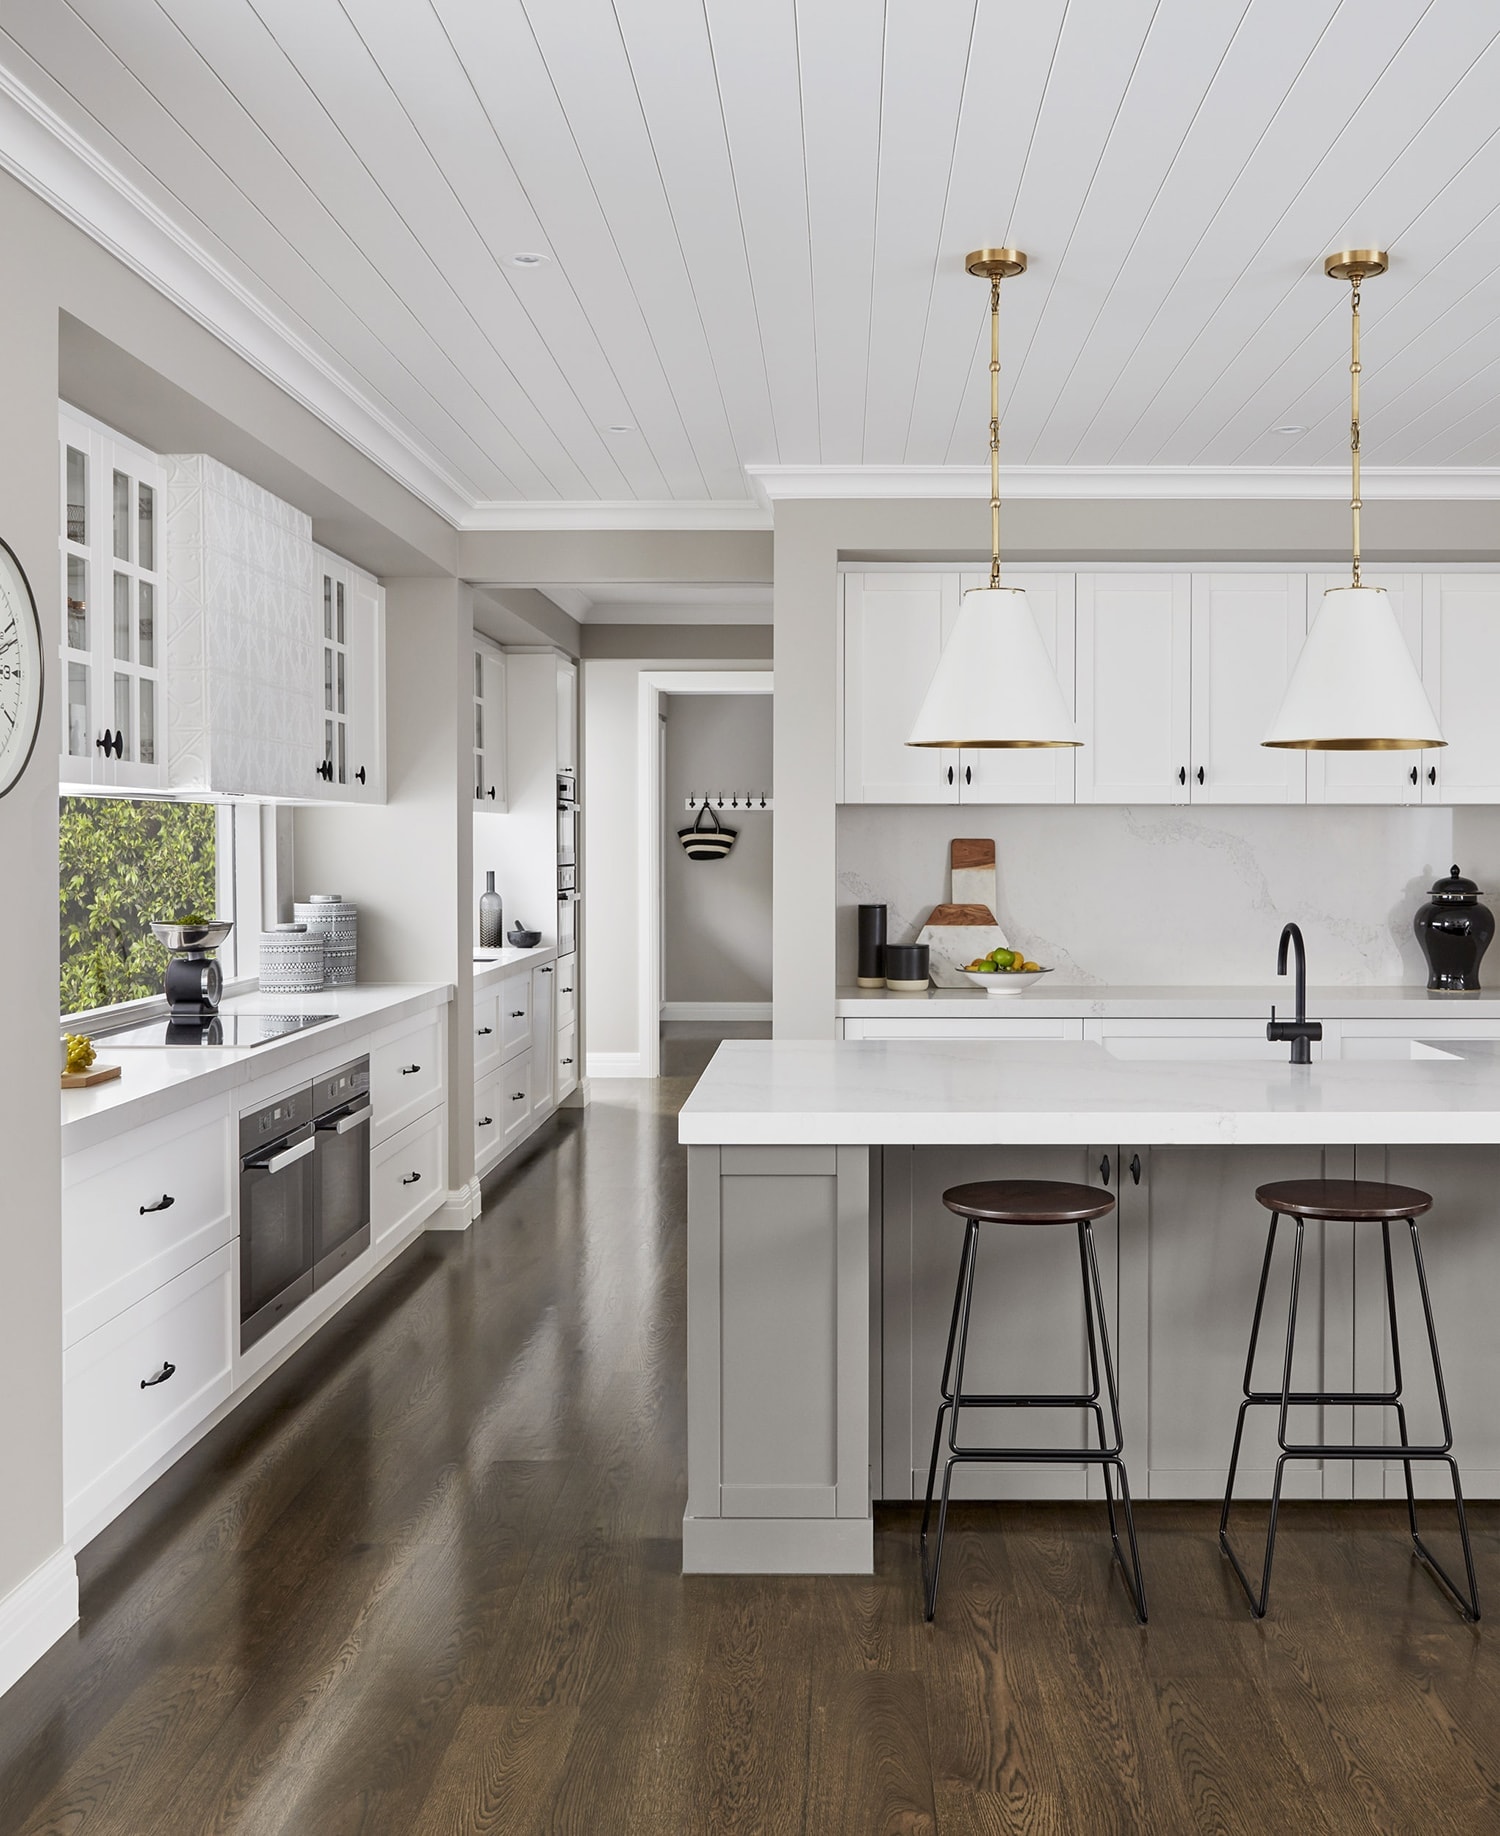 35+ Hamptons style kitchen ideas - kitchen islands, tiling and colours